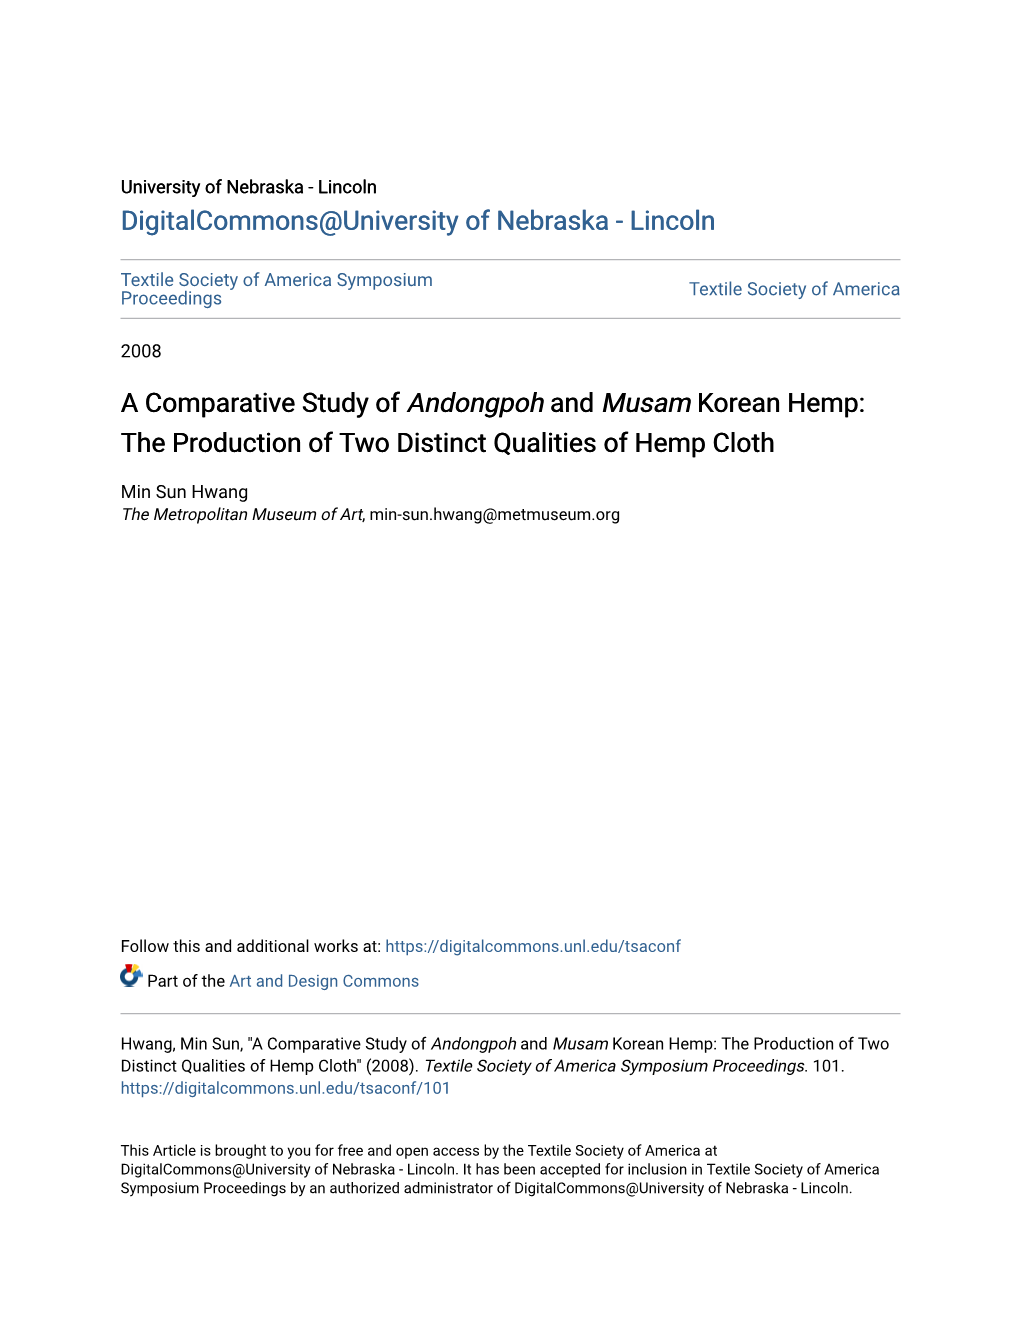 A Comparative Study of Andongpoh and Musam Korean Hemp: the Production of Two Distinct Qualities of Hemp Cloth